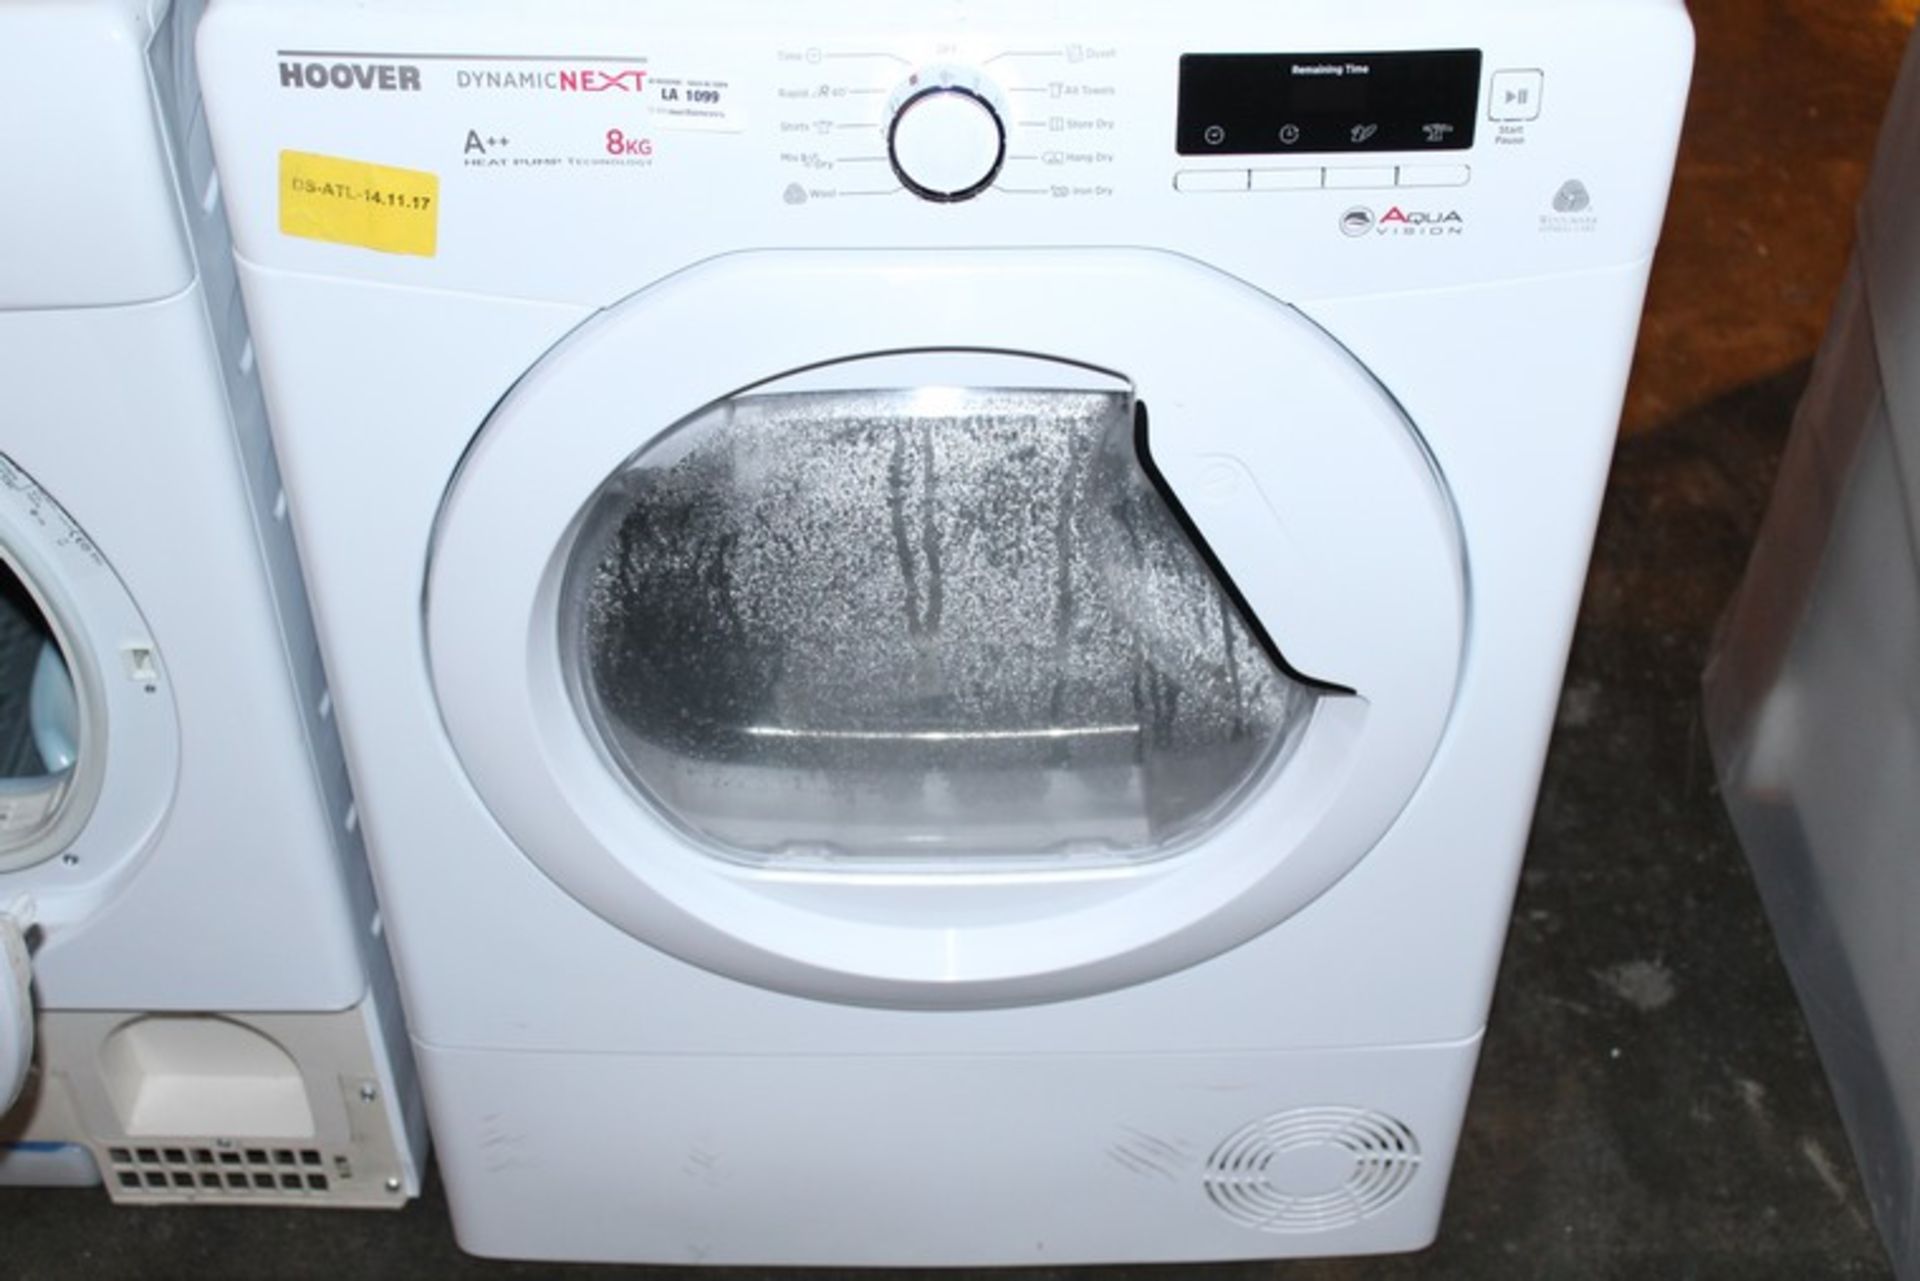 1 x HOOVER 8KG HEAT PUMP TECHNOLOGY DRYER IN WHITE (14/11/17) *PLEASE NOTE THAT THE BID PRICE IS